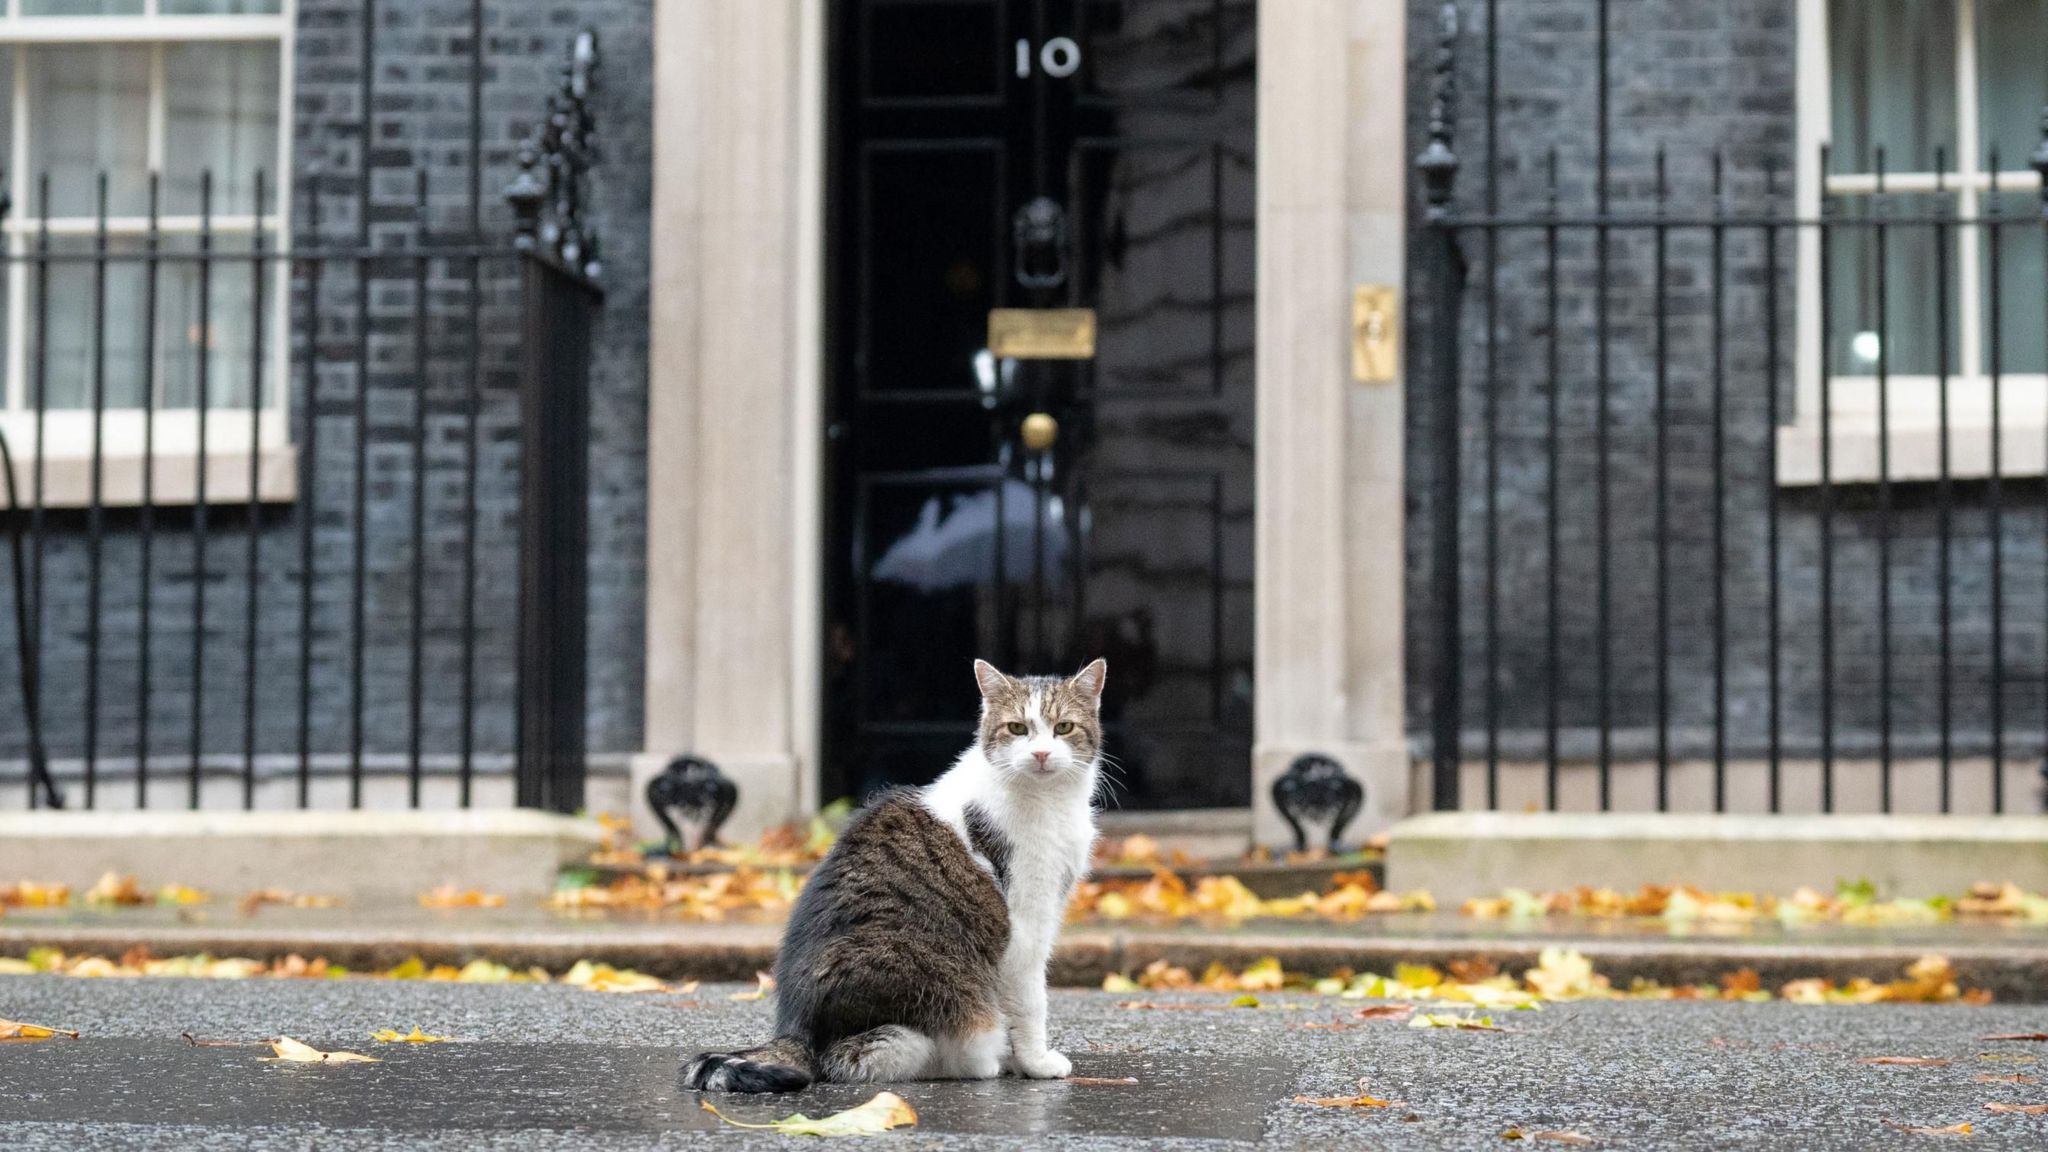 Larry the cat in front of Downing Street